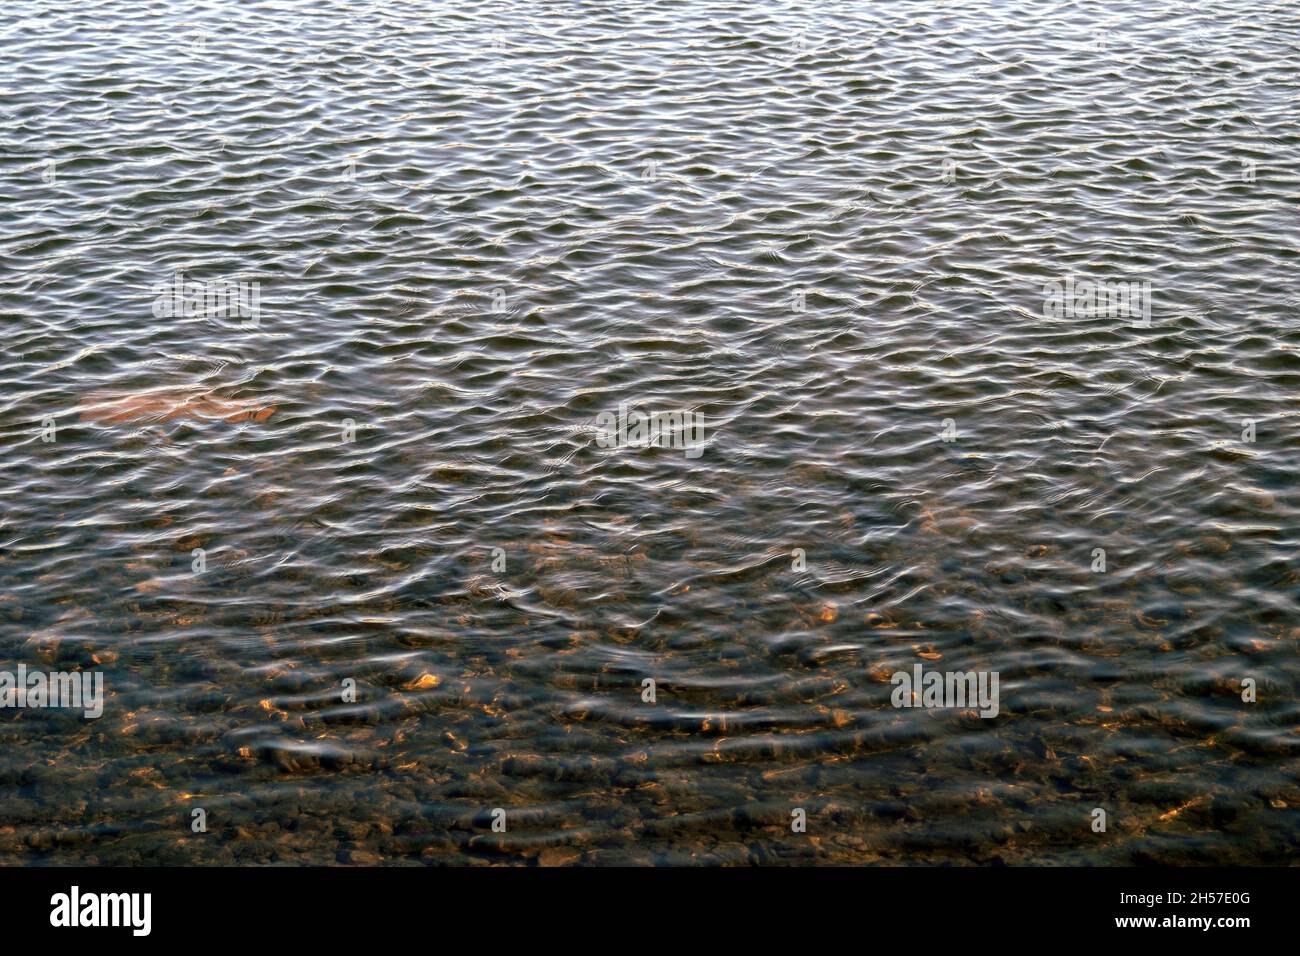 Ripples on water, calmness on river, view of reservoir from the shore Stock Photo